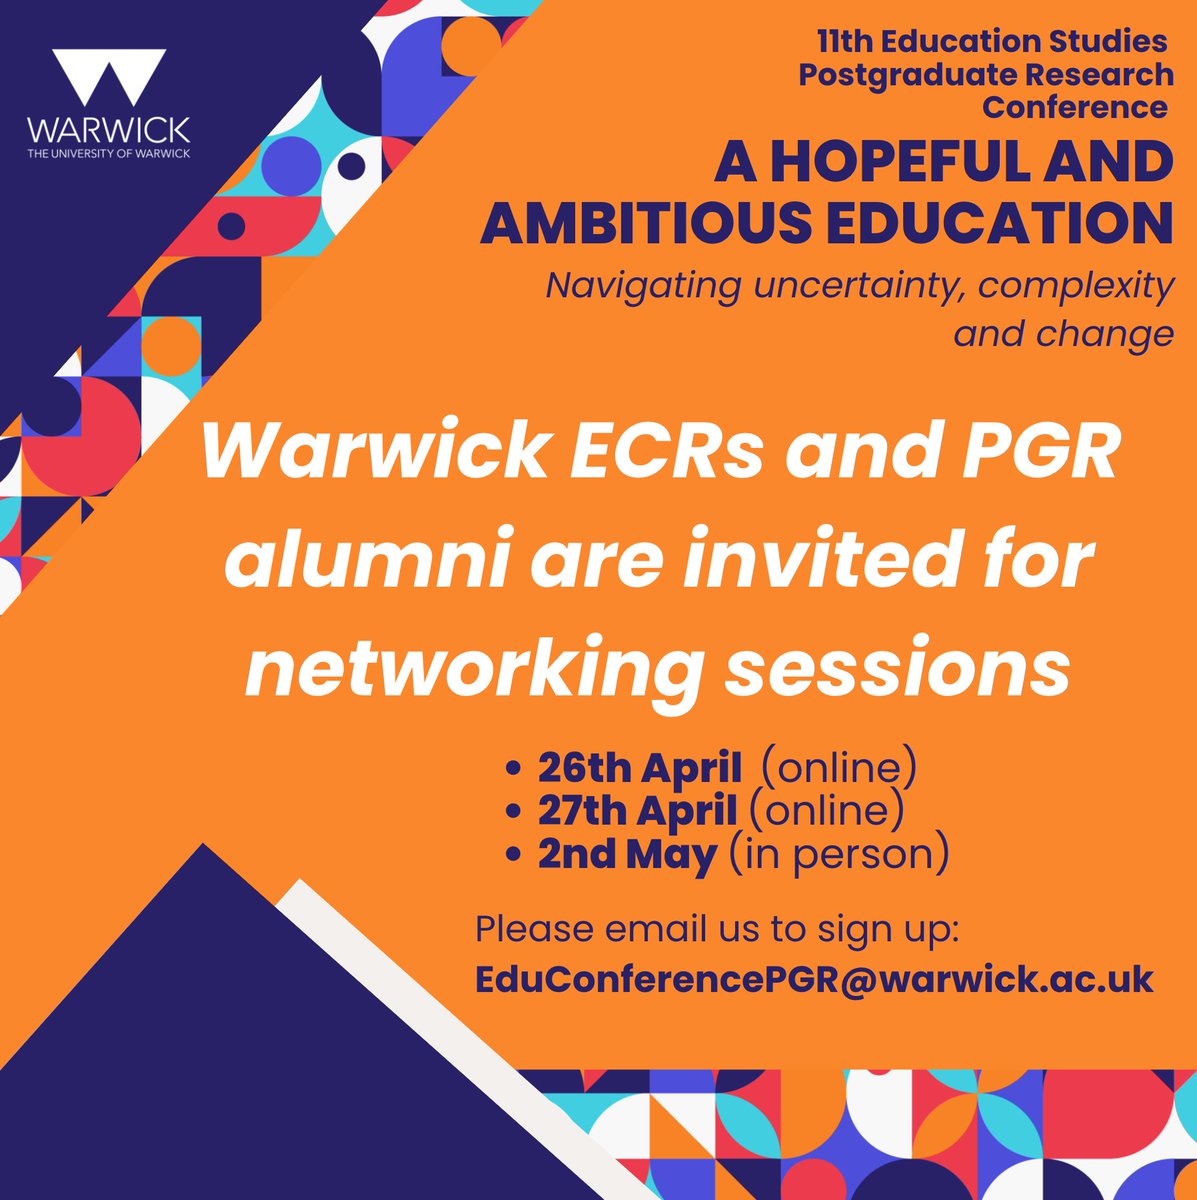 As part of our 11th PGR Conference taking place on 26 & 27 April, we invite Warwick ECRs and PGR alumni to join the networking sessions taking place during and after the conference. Email the organising team to sign up! See times below. bit.ly/490Mva0